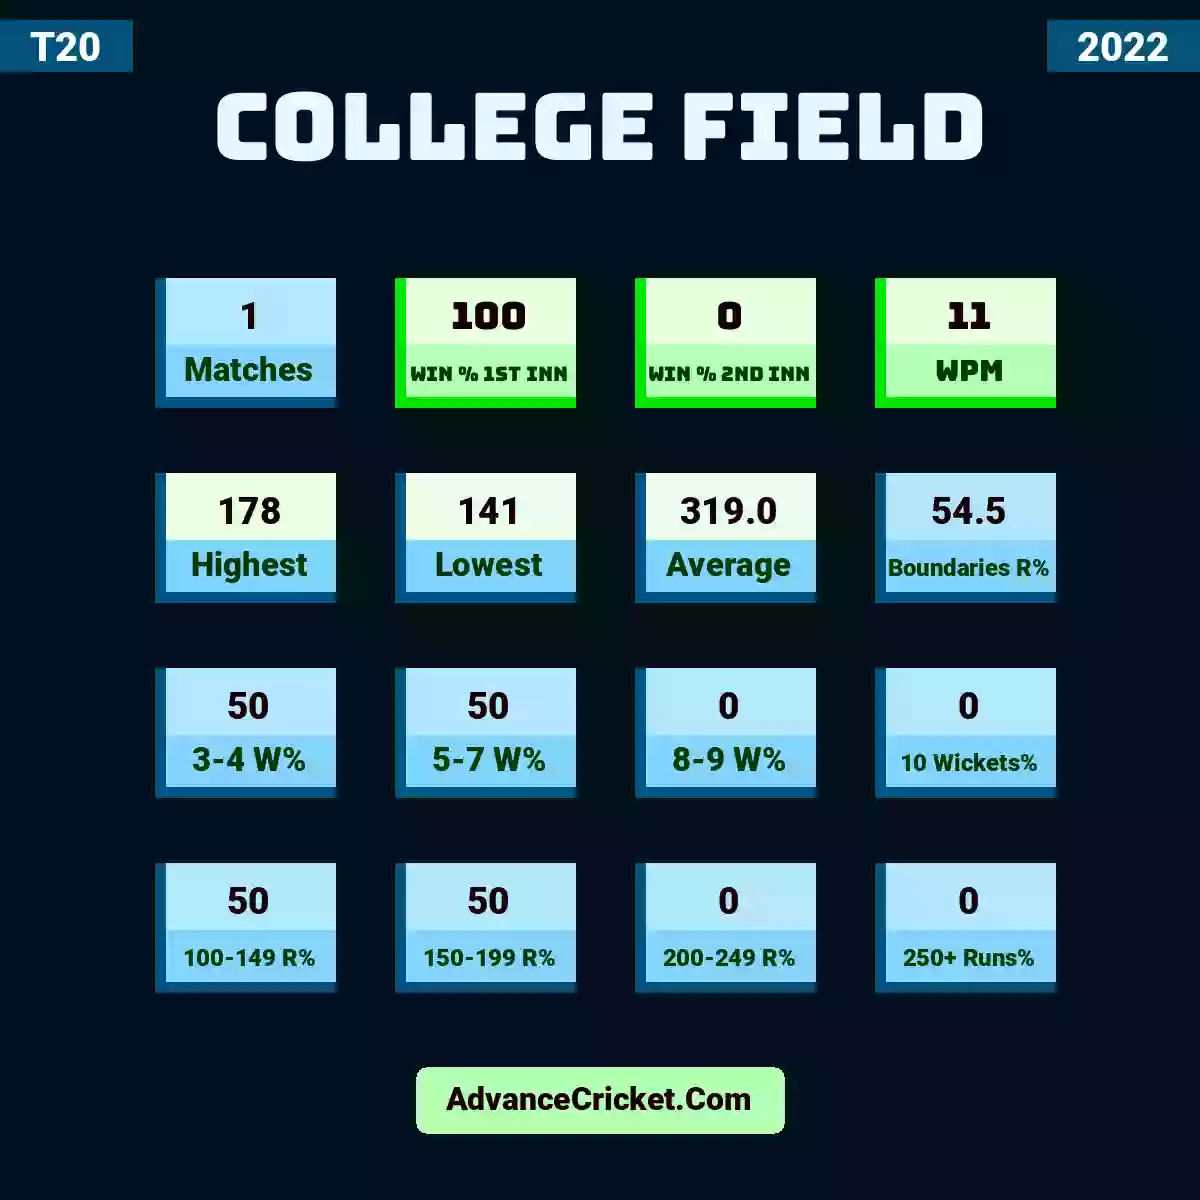 Image showing College Field with Matches: 1, Win % 1st Inn: 100, Win % 2nd Inn: 0, WPM: 11, Highest: 178, Lowest: 141, Average: 319.0, Boundaries R%: 54.5, 3-4 W%: 50, 5-7 W%: 50, 8-9 W%: 0, 10 Wickets%: 0, 100-149 R%: 50, 150-199 R%: 50, 200-249 R%: 0, 250+ Runs%: 0.